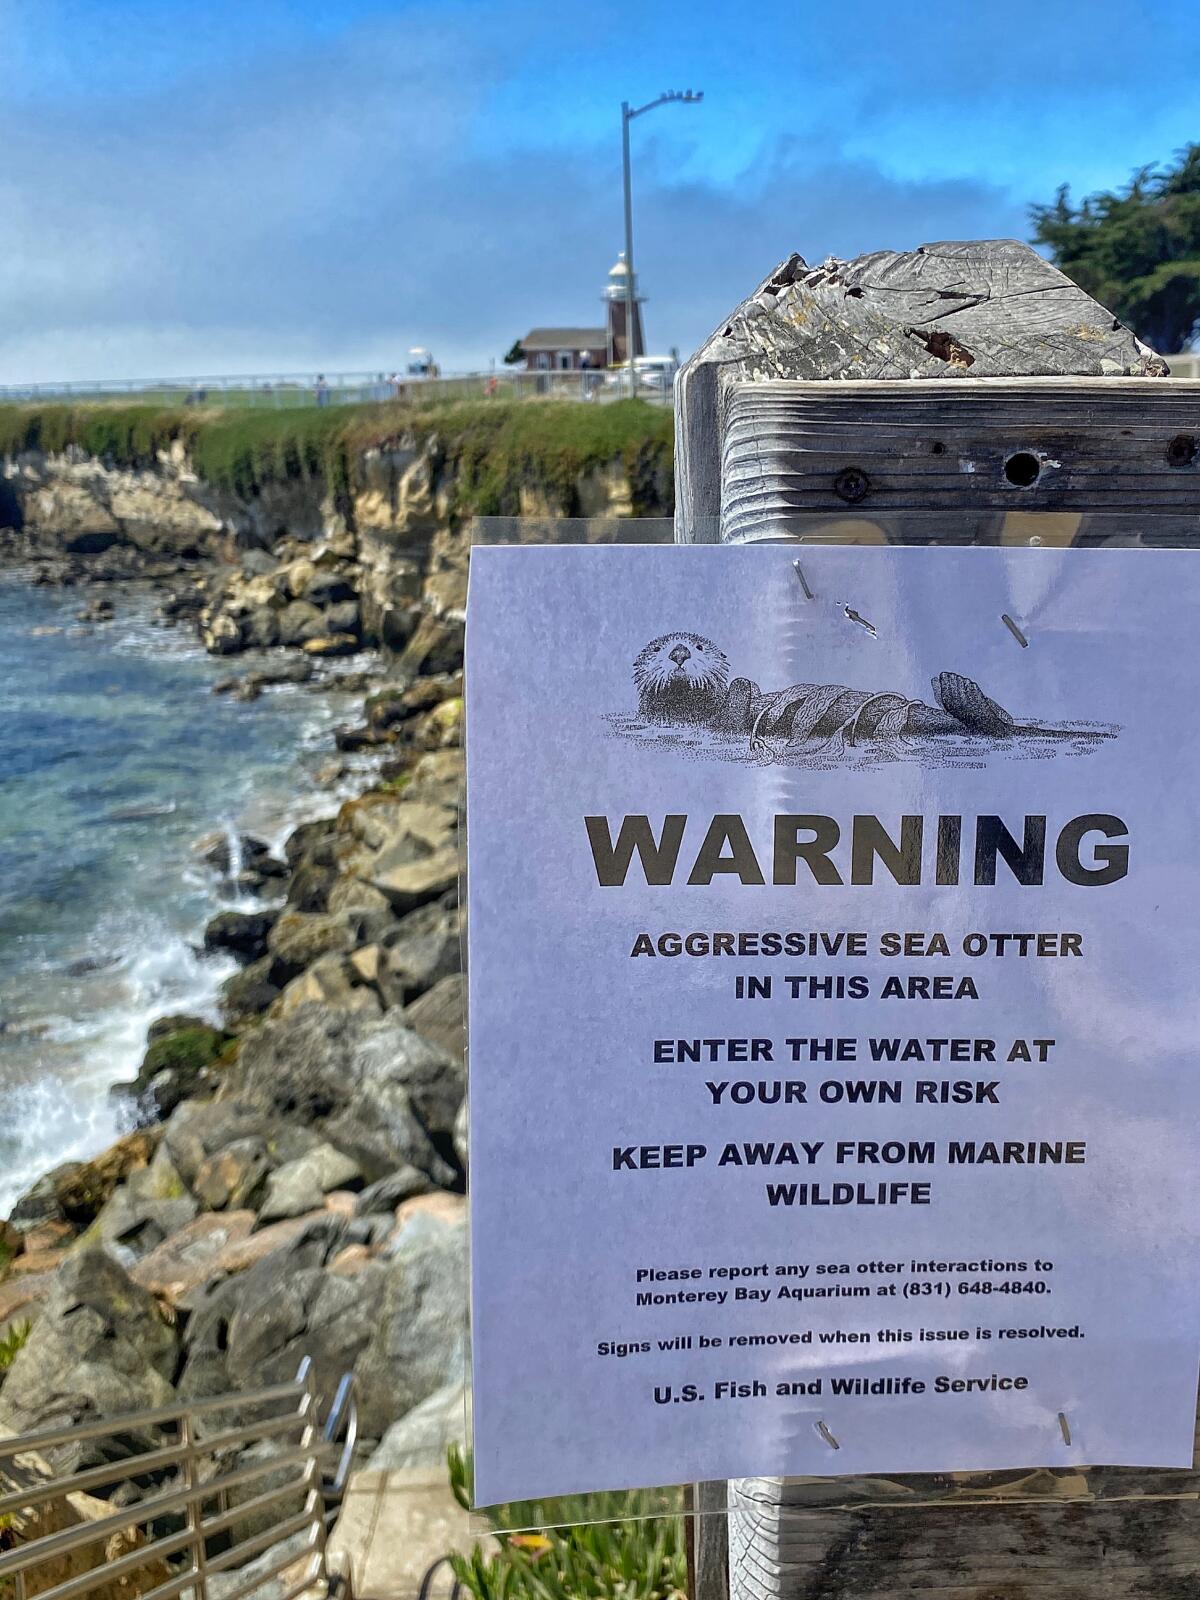 A sign on a shore warns of an aggressive sea otter. "Enter at your own risk," it says.